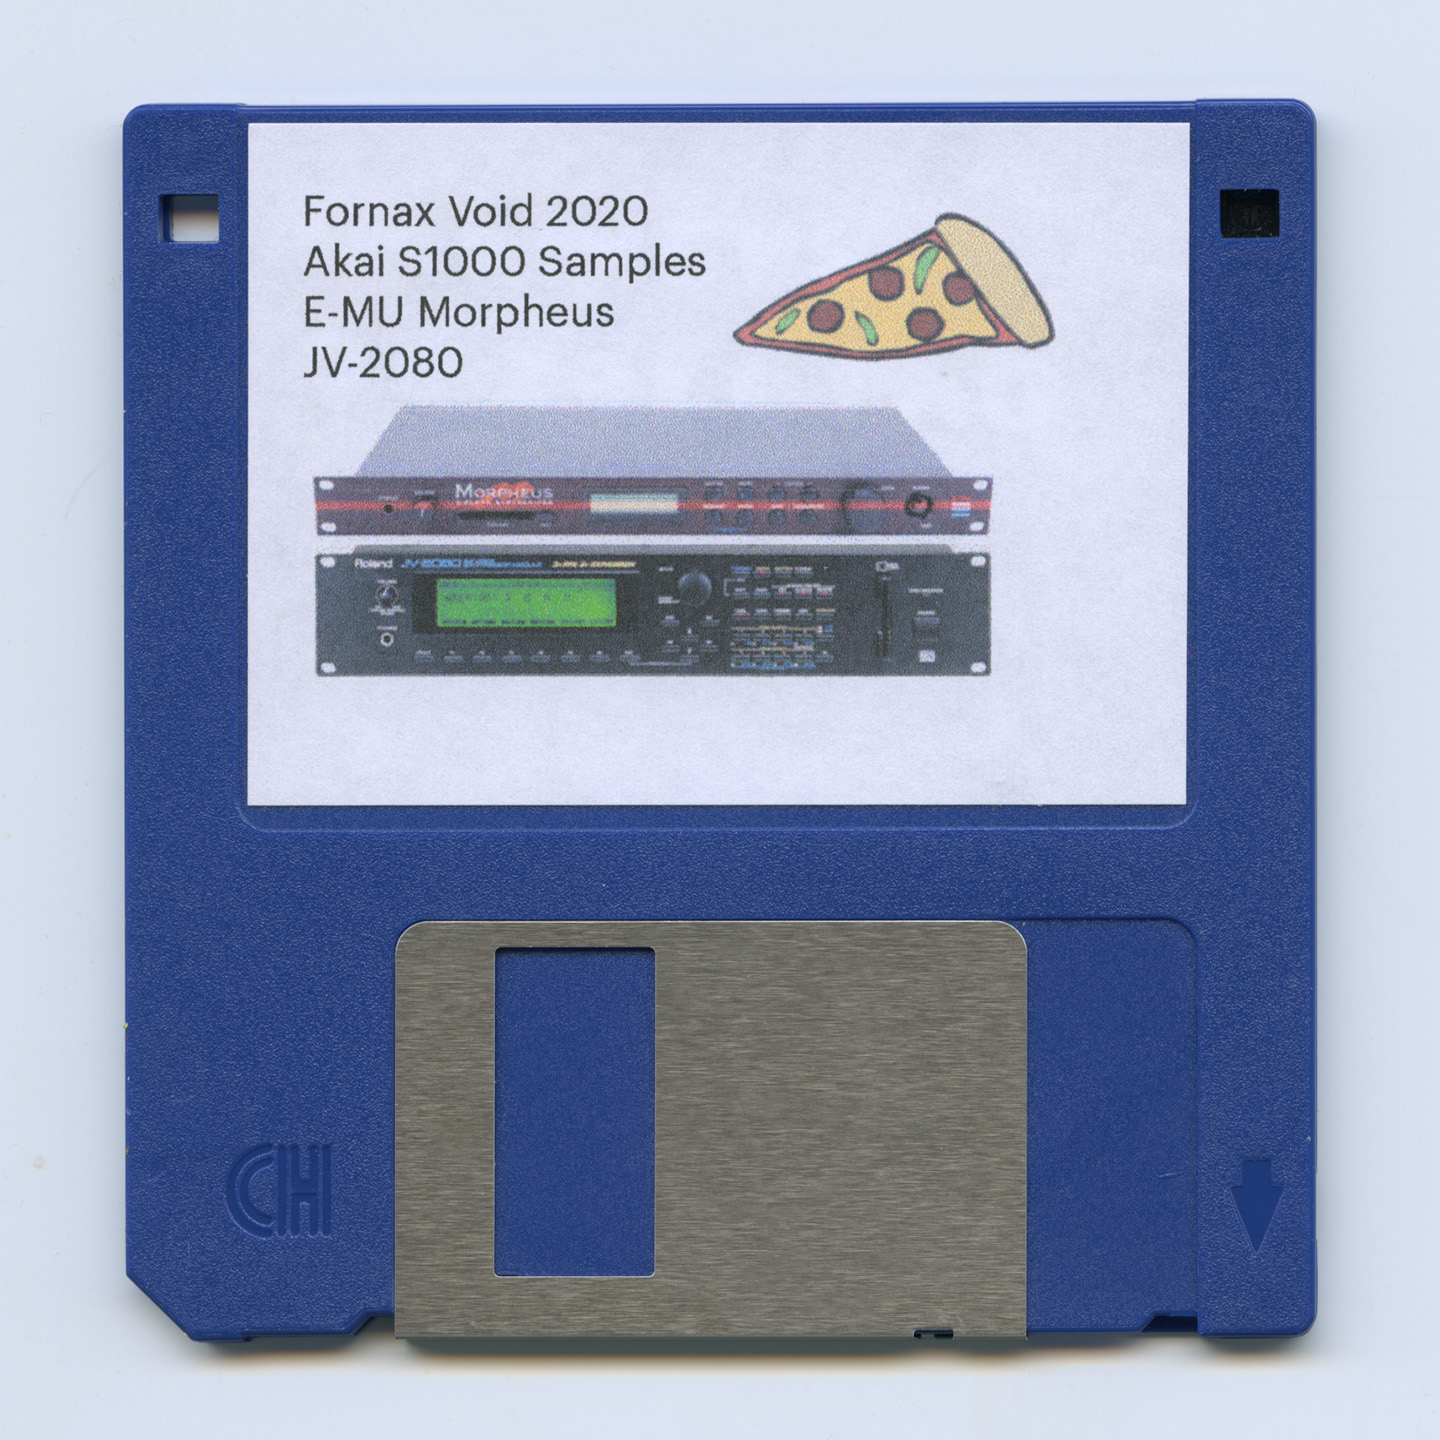 Fornax Void Akai S1000 2020 Pizza Sample Disk